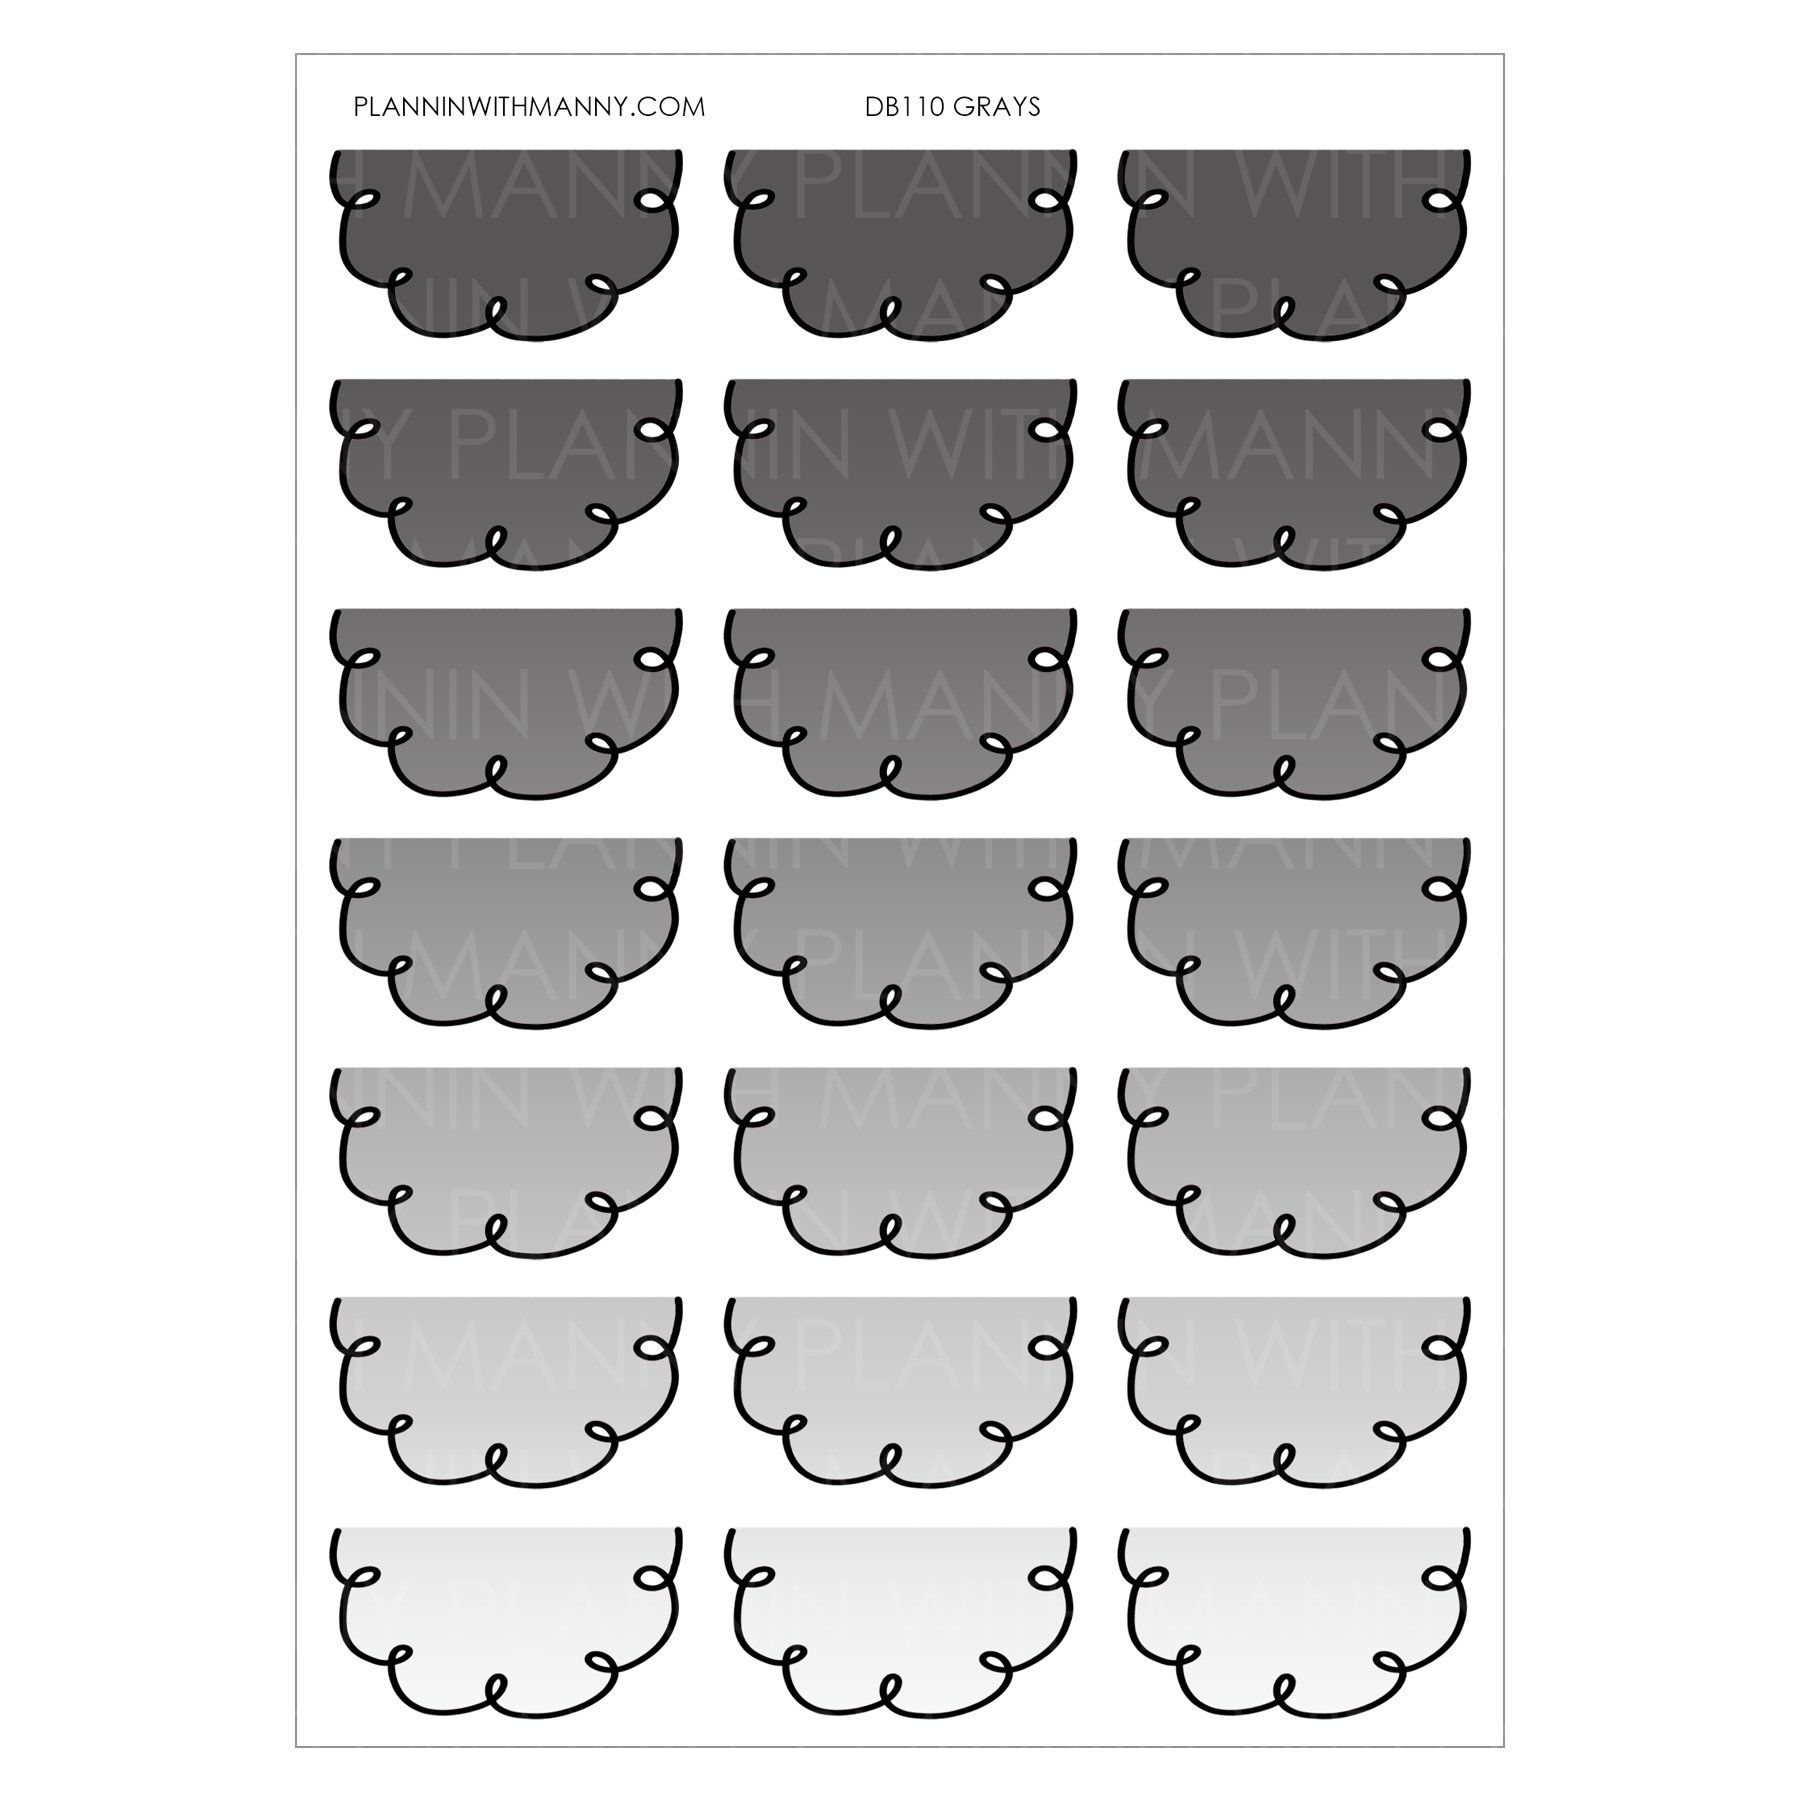 DB110 GRAYS 1.5" Doodle Half Circle Planner Stickers